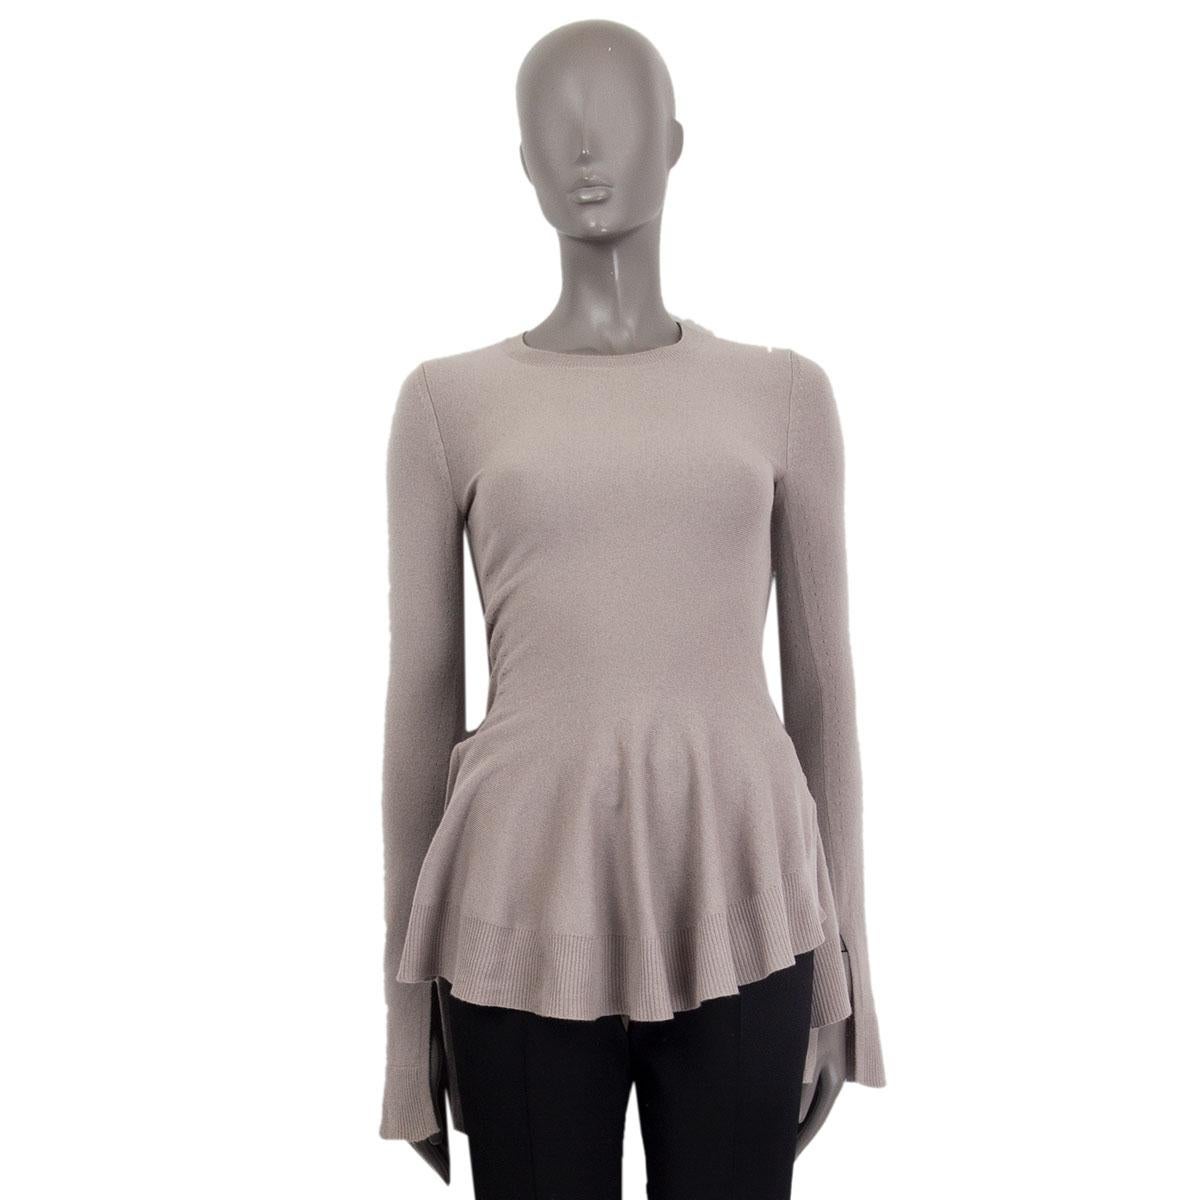 Alexander McQueen crew-neck sweater in taupe wool (70%) and cashmere (30%) with a flared bottom and two slits on the side. Has been worn and is in excellent condition. 

Tag Size XS 
Size XS
Shoulder Width 35cm (13.7in)
Bust 38cm (14.8in)
Waist 66cm